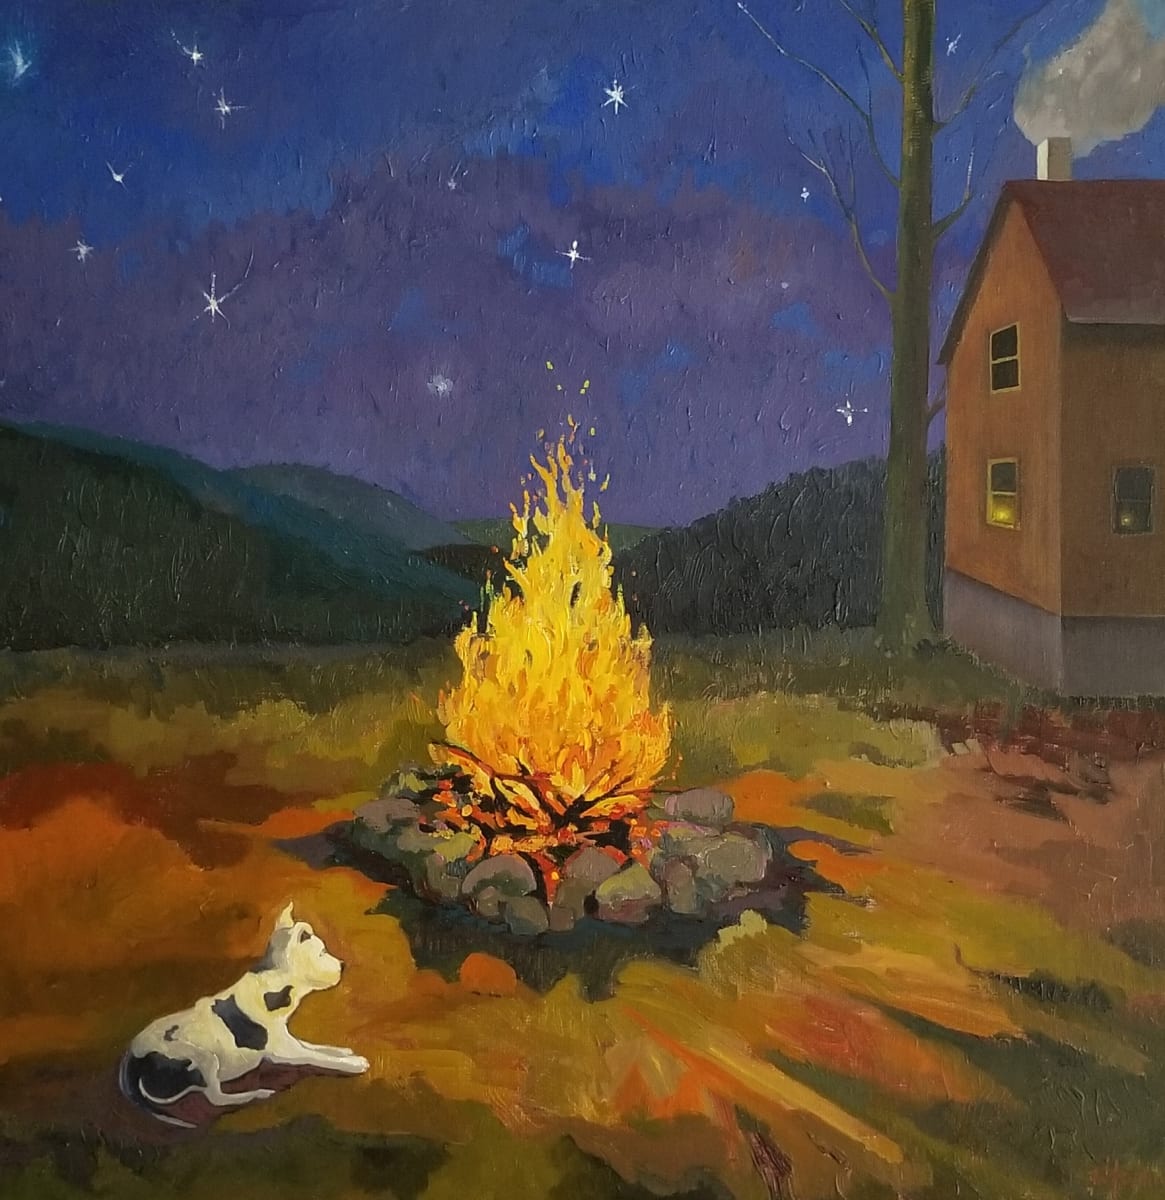 Sadie at the Fire by Lauren Litwa  Image: Sadie at the Fire